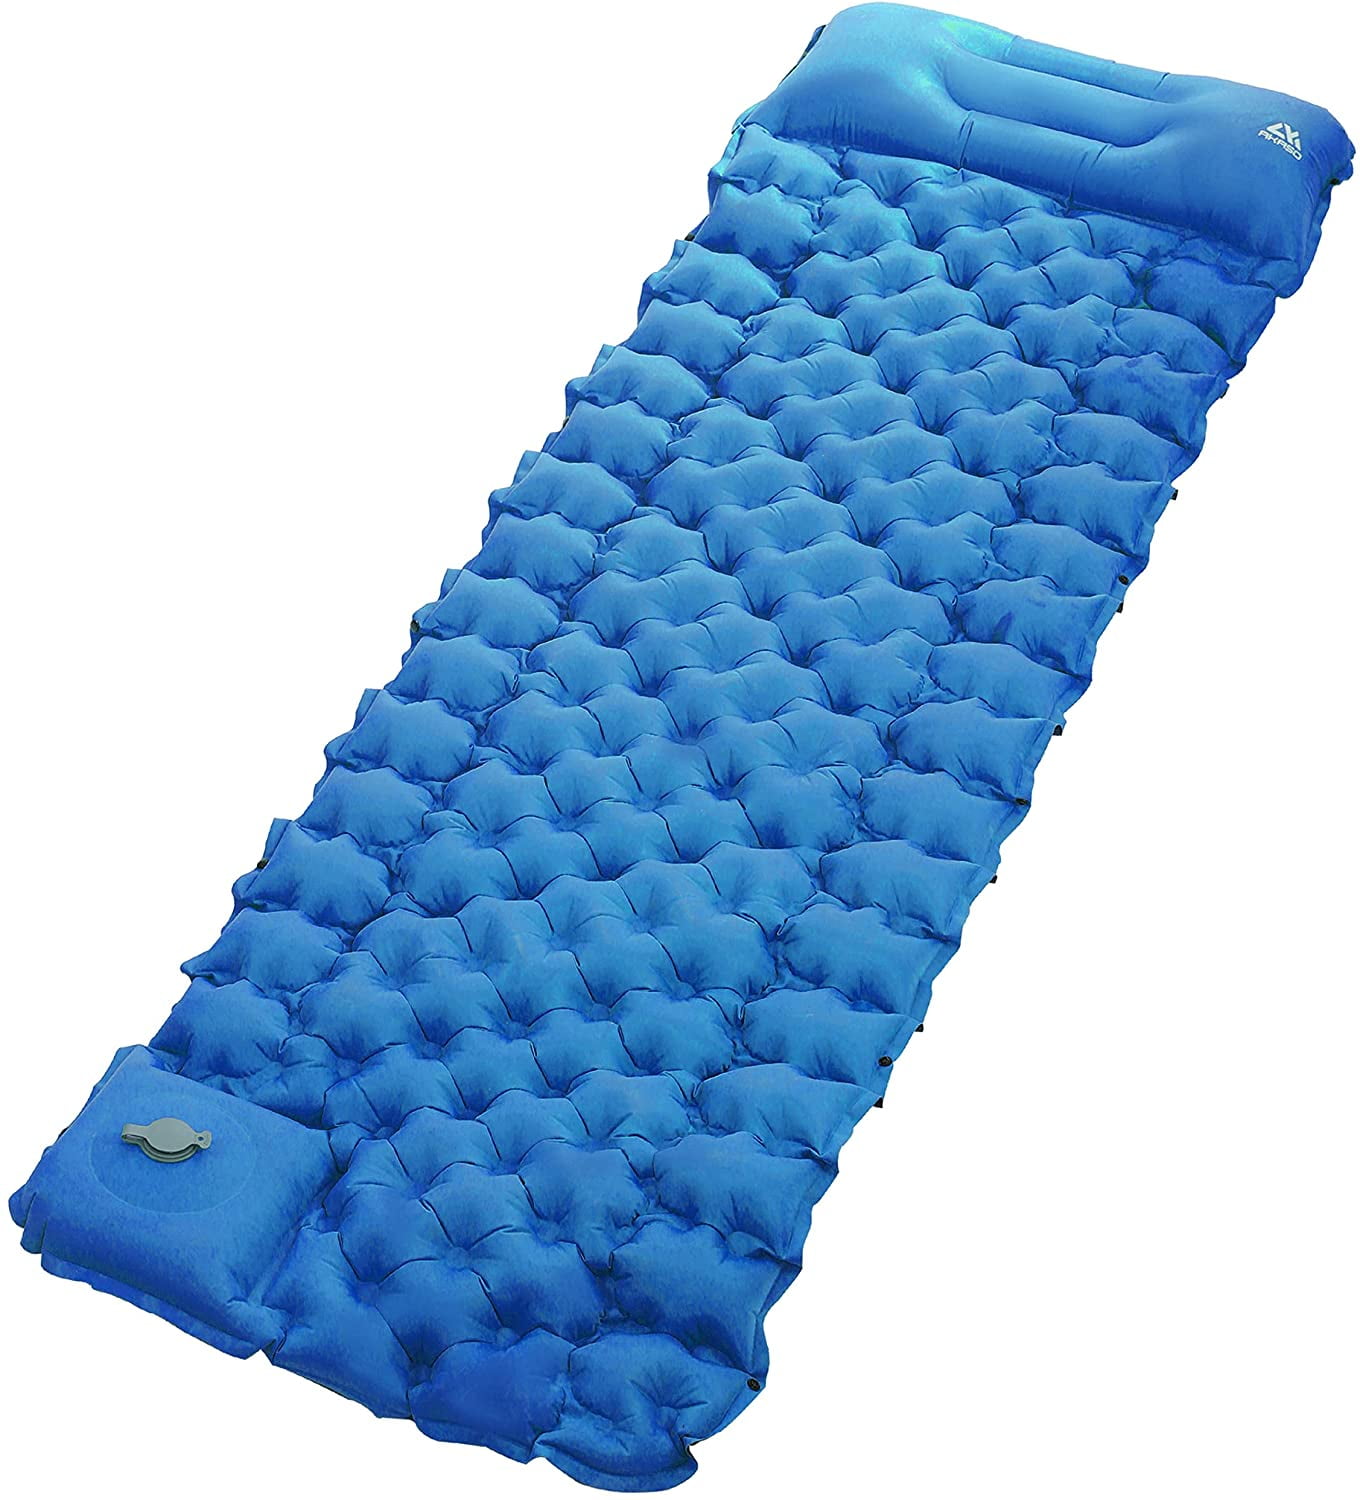 Camping Mat,Inflatable Ultralight Sleeping Mat with Pillow,Compact Air Camping Mat with Foot Pump,Lightweight Sleeping Pad for Backpacking,Camping,Hiking,Traveling and Outdoor Activities Blue